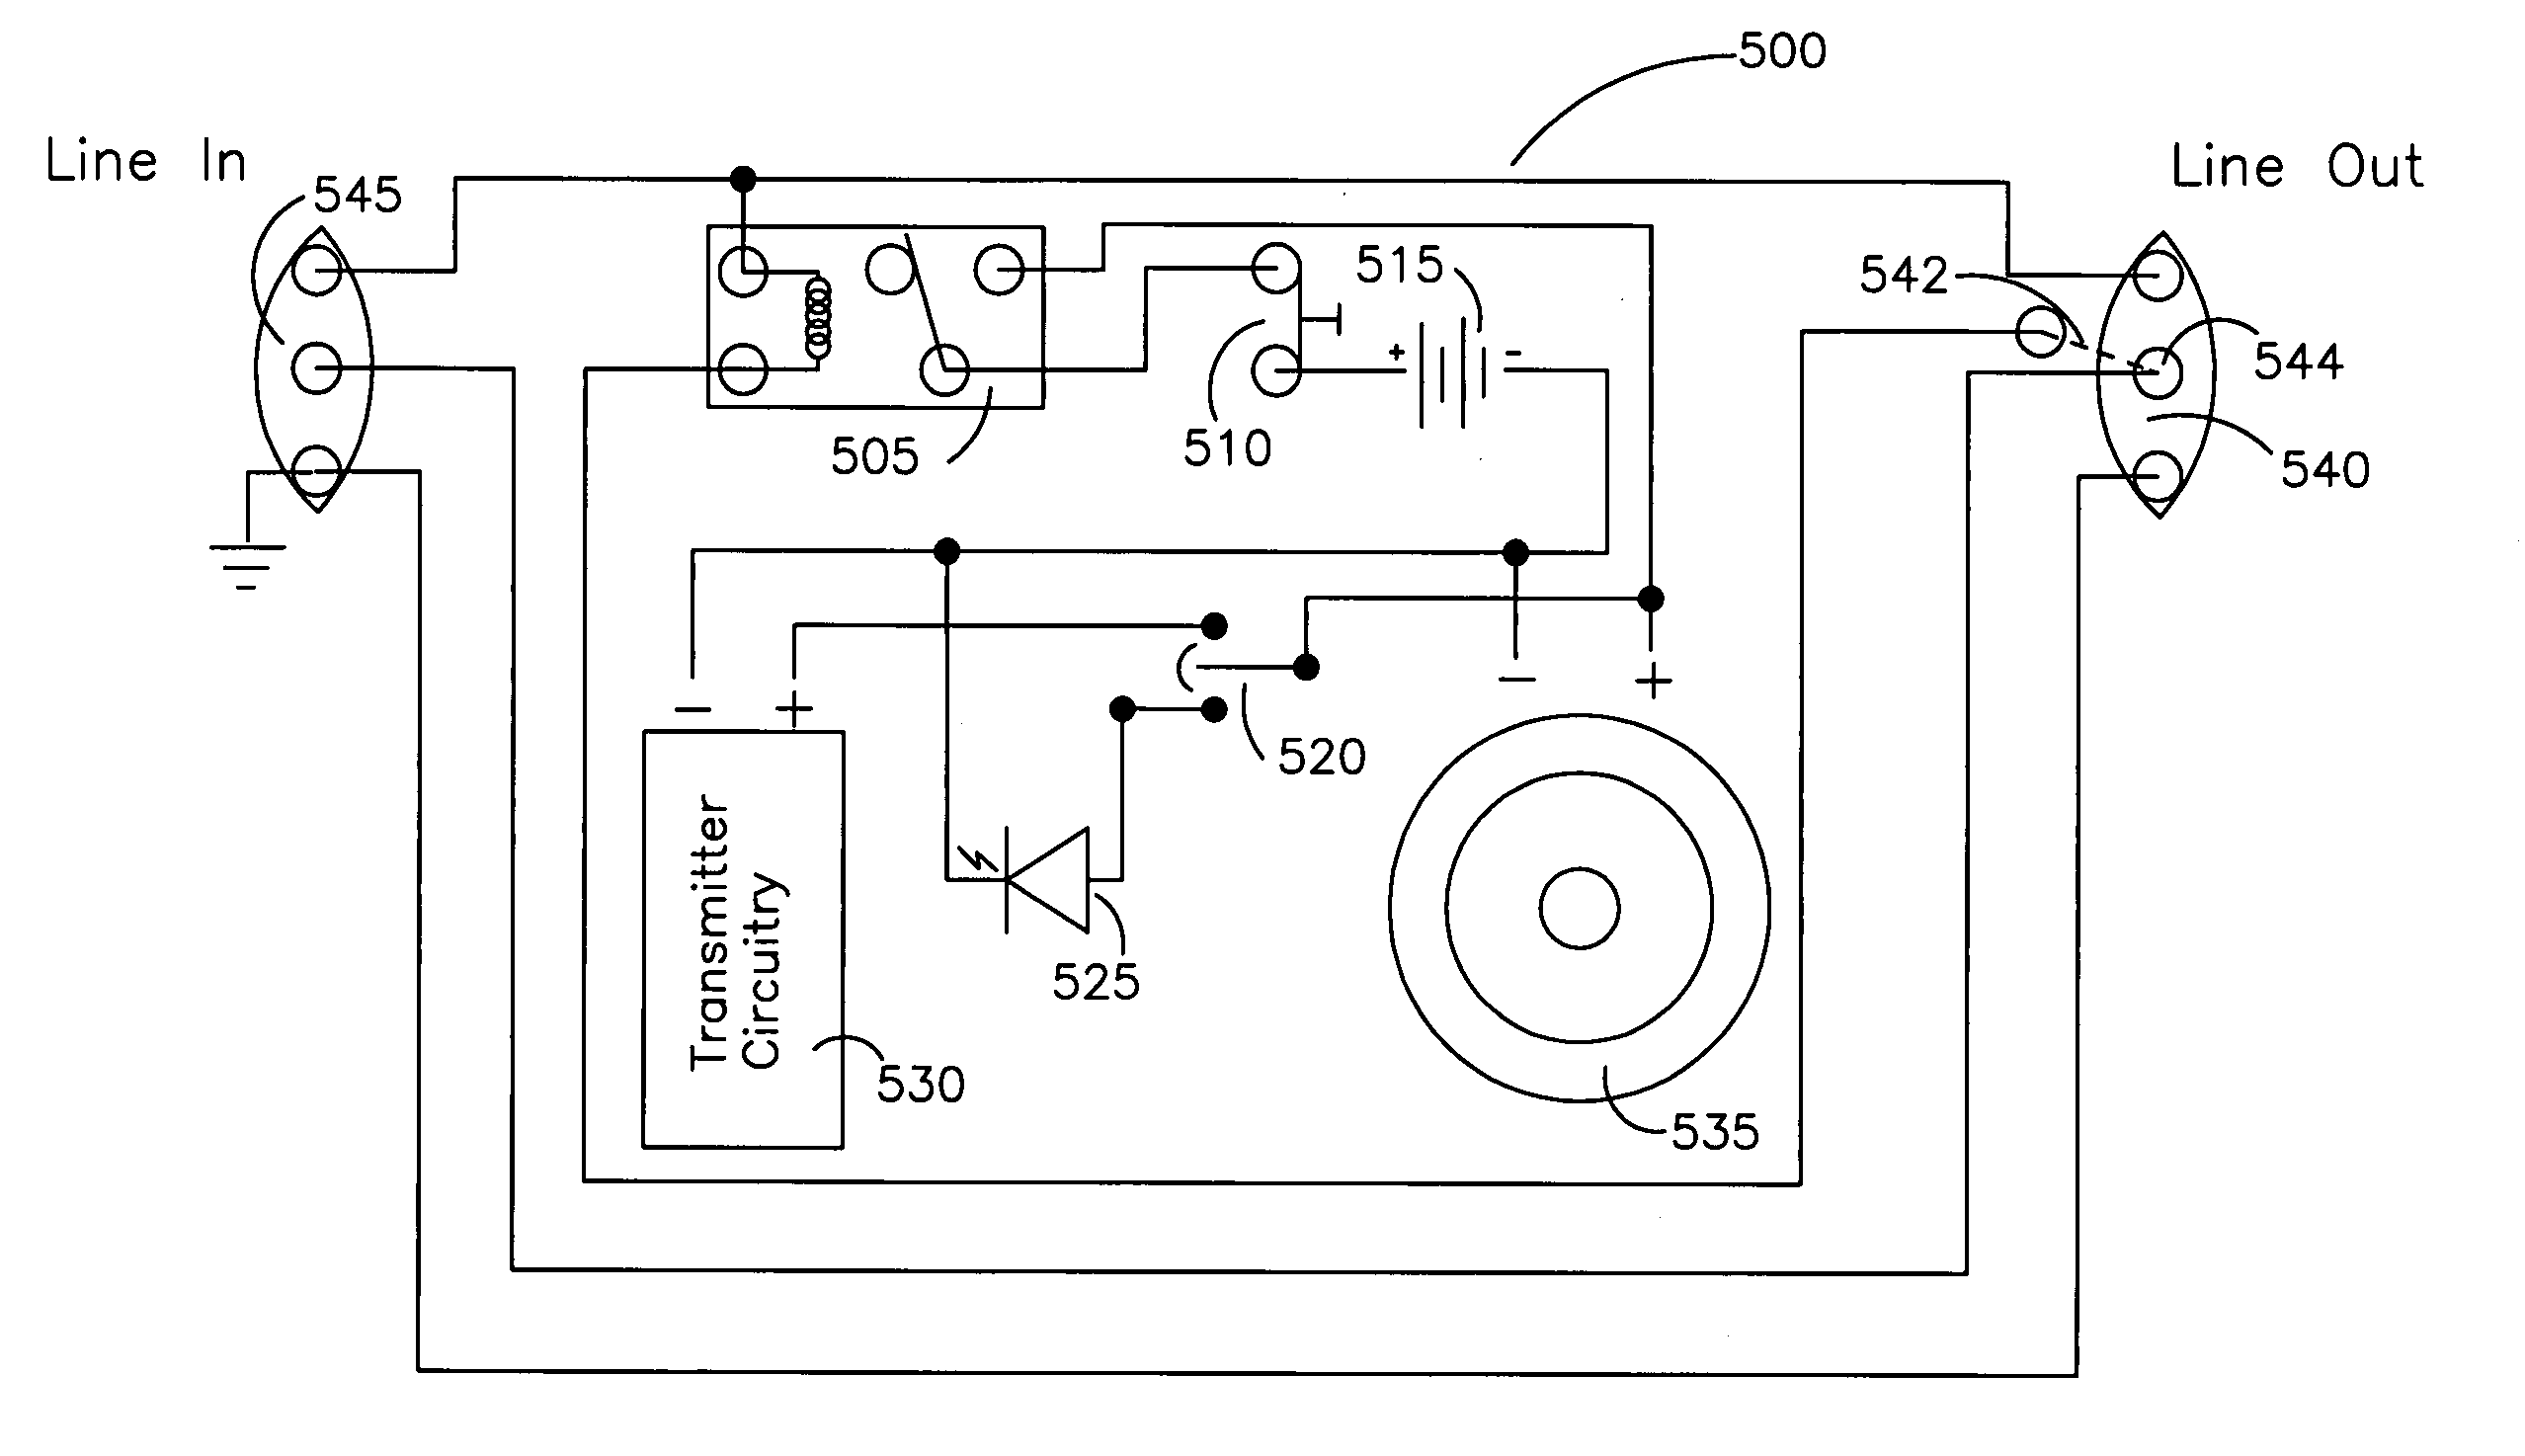 Device for monitoring and alerting of a power disruption to electrical equipment or an appliance